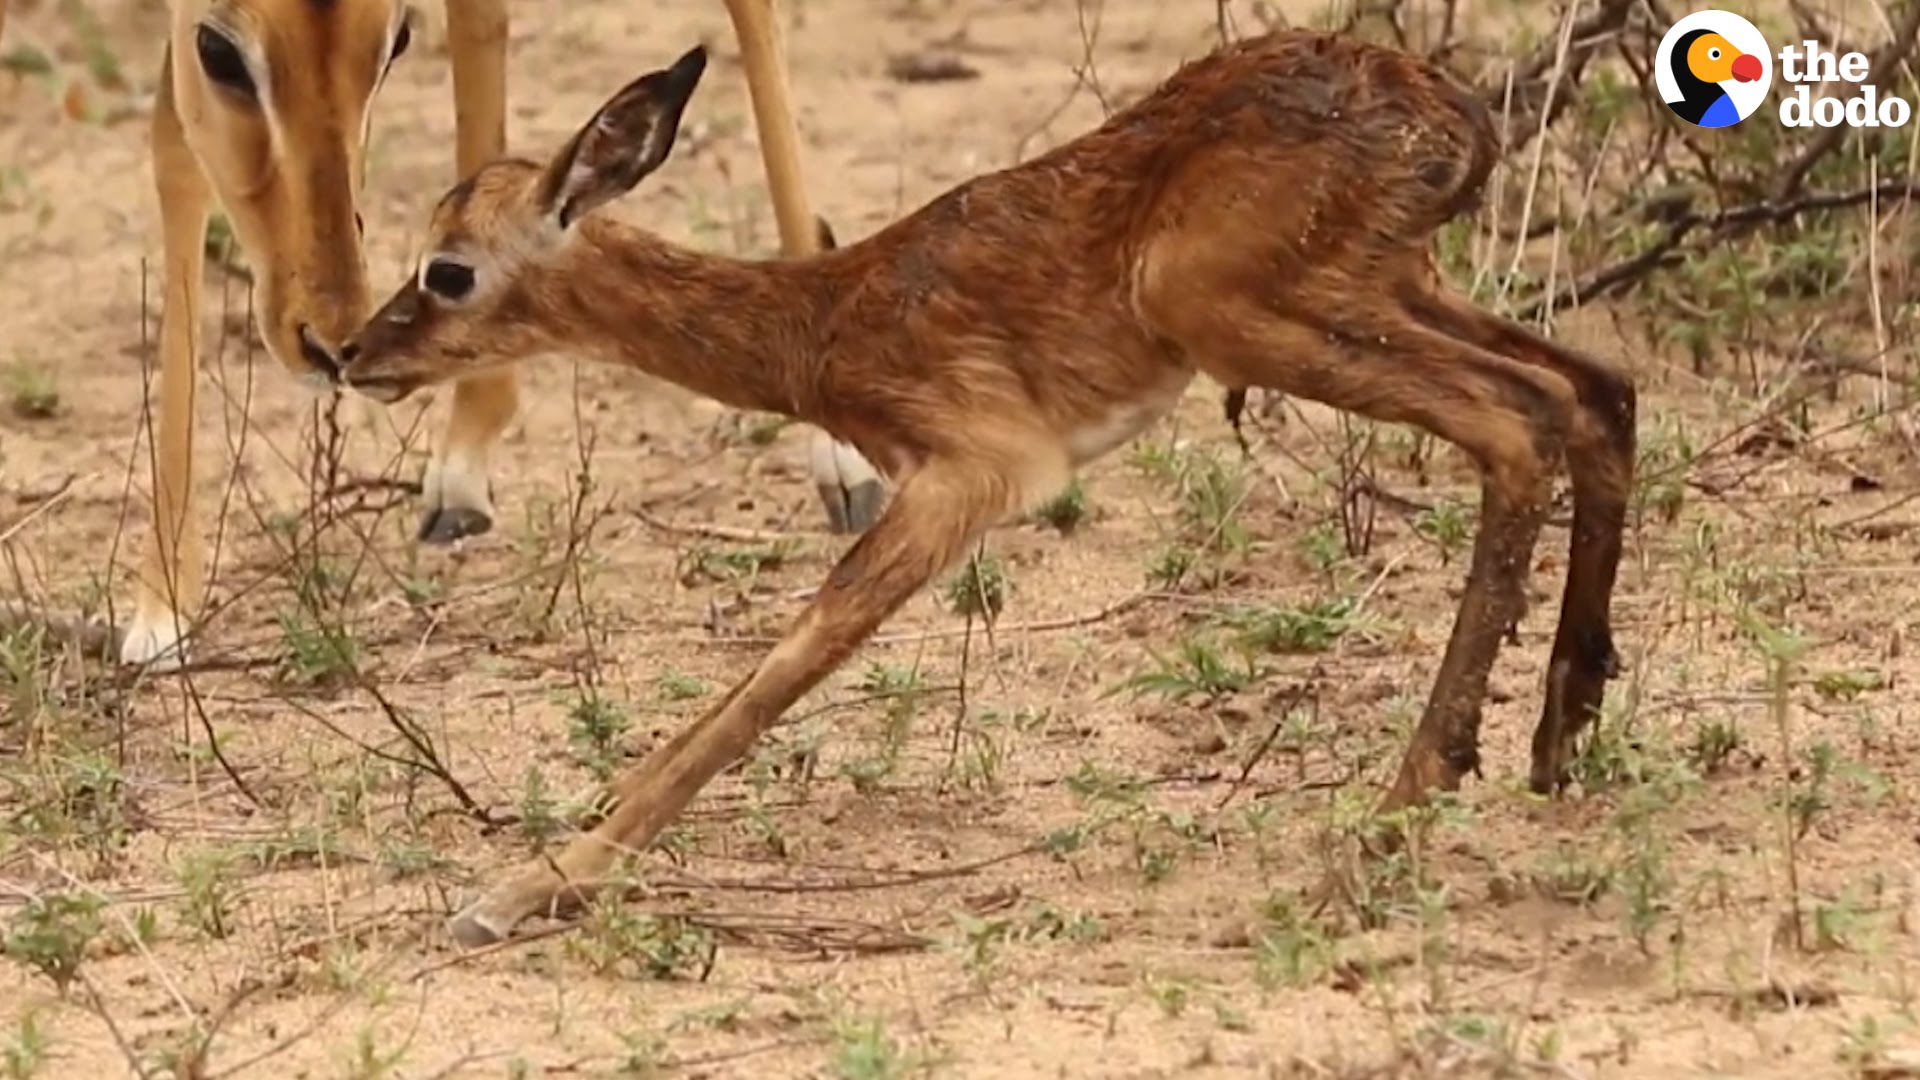 Baby Impala Takes His First Steps - YouTube